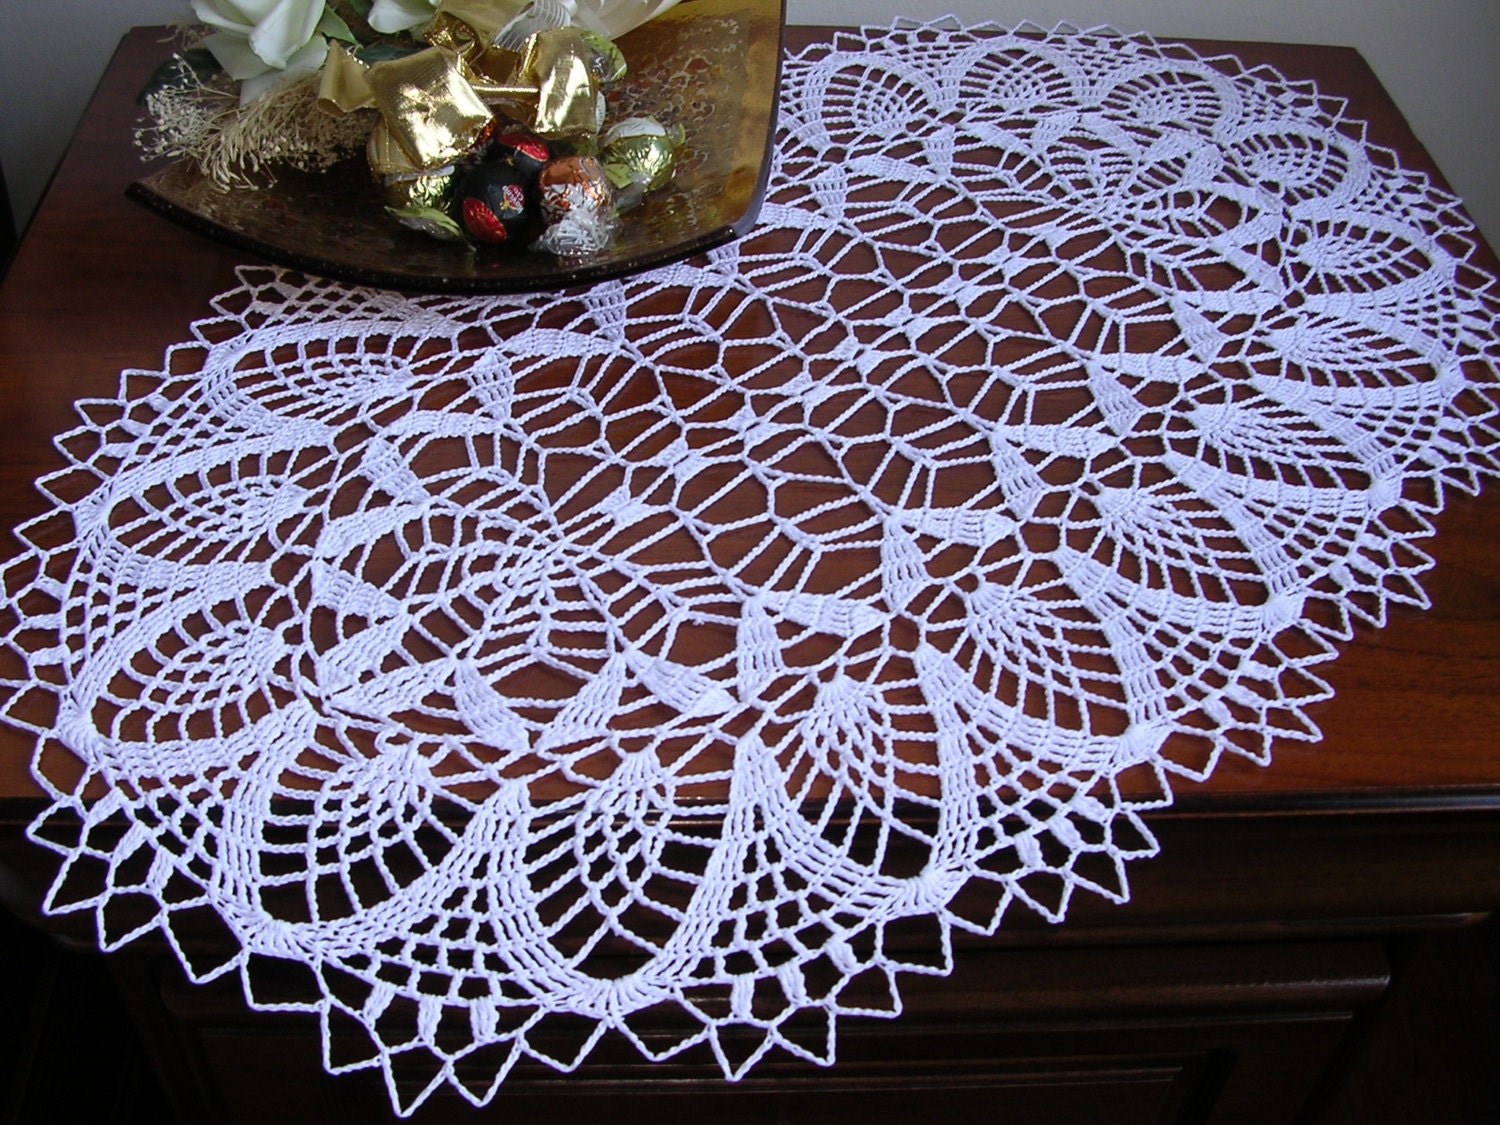 White Vintage Hand Crochet Lace Doilies Oval Cotton Table Runner Mats 11x27inch 